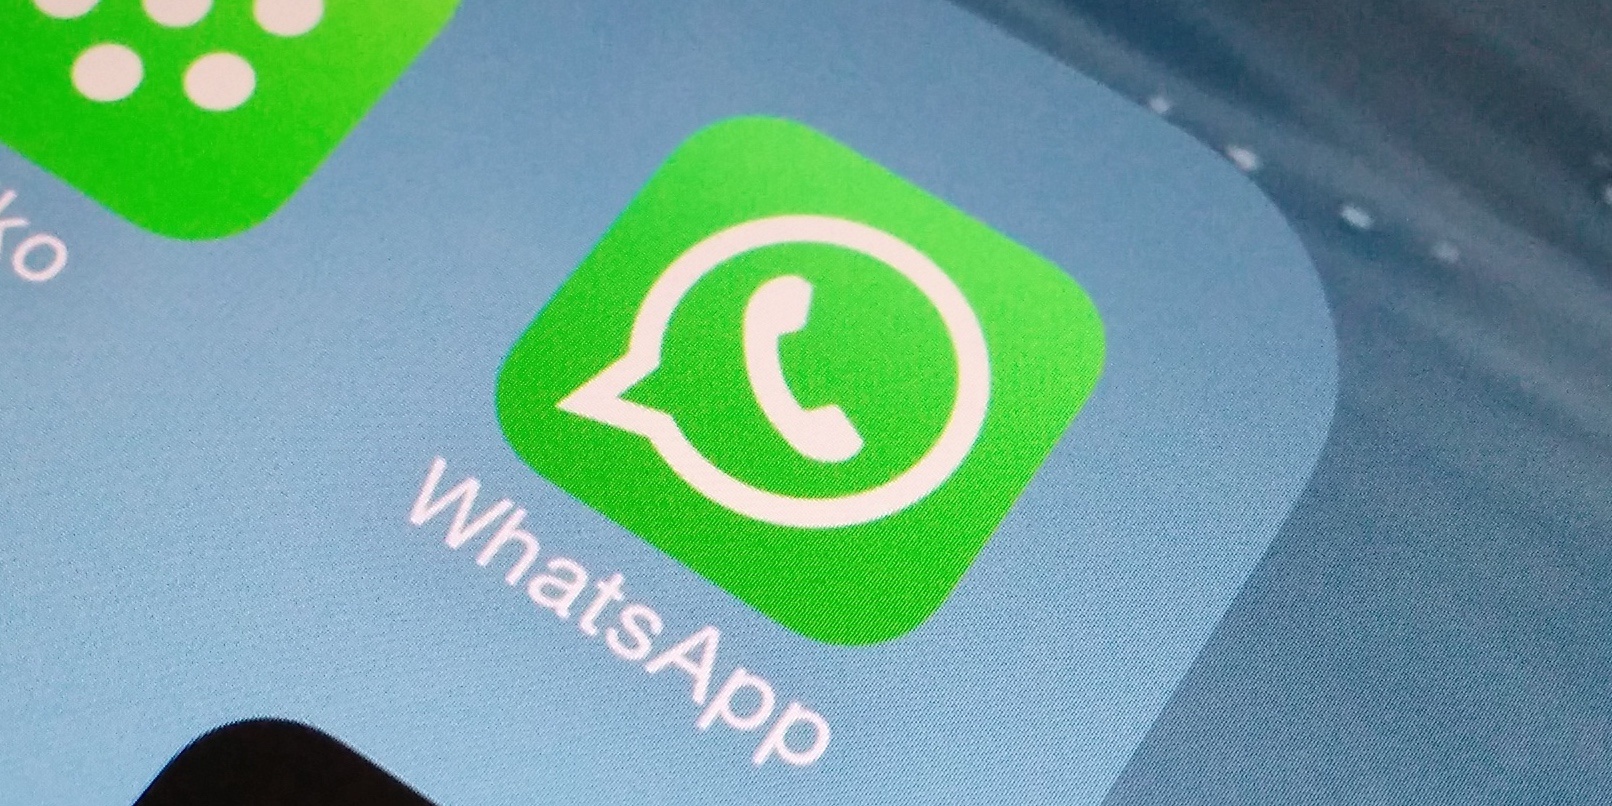 WhatsApp will soon let you send uncompressed images thumbnail